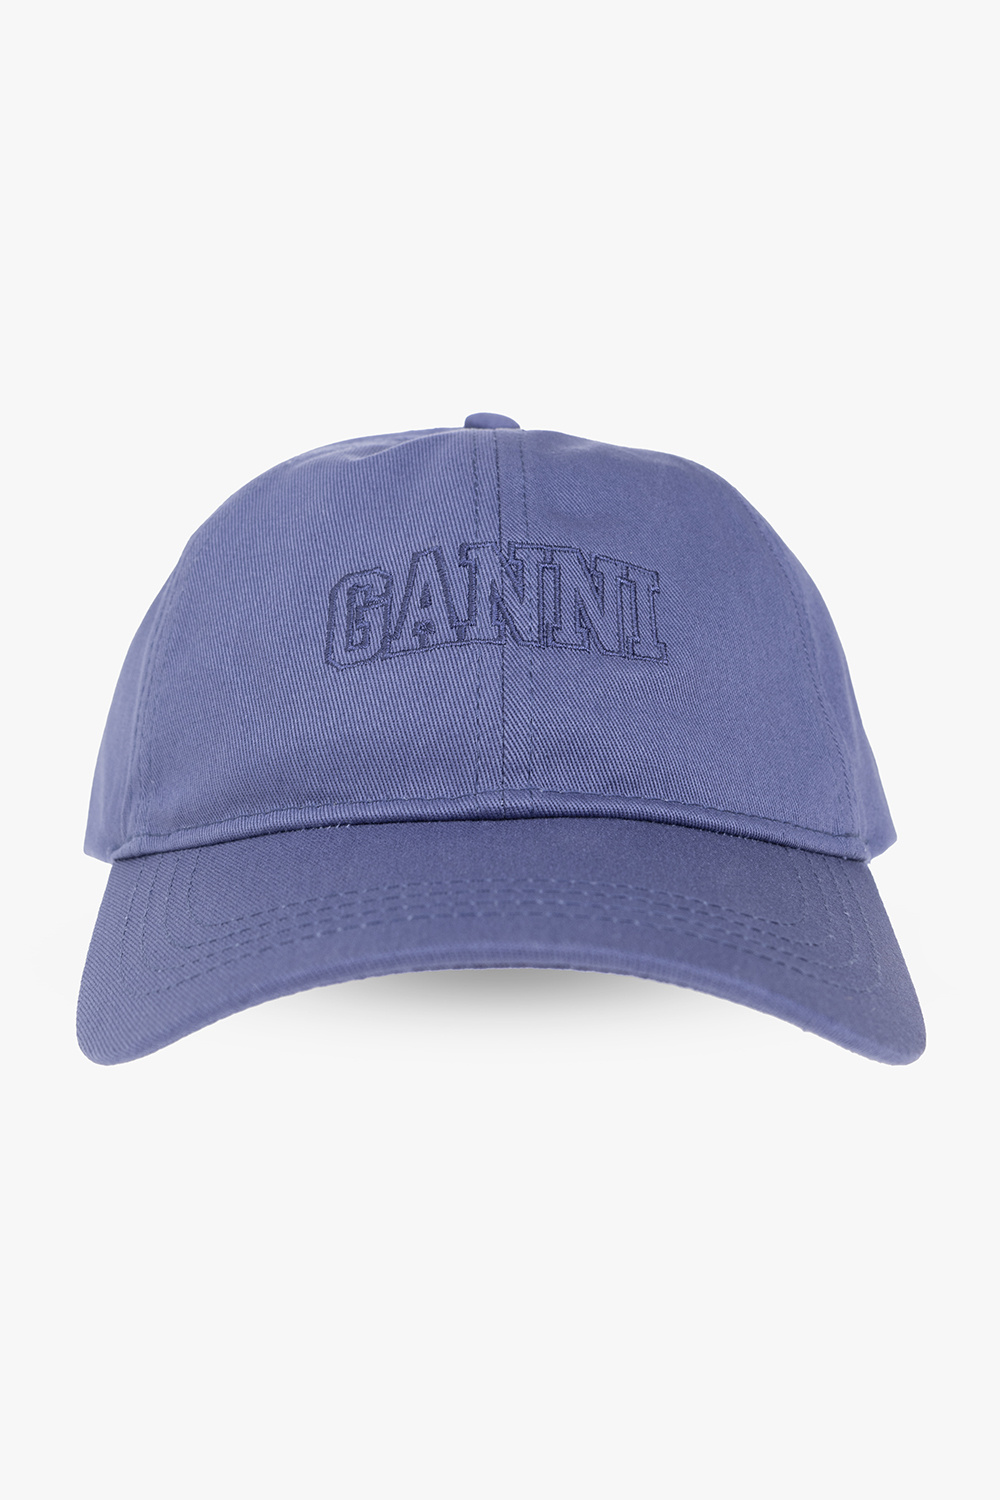 Ganni Go generous on swim cap sizing you dont want it riding up over your ears